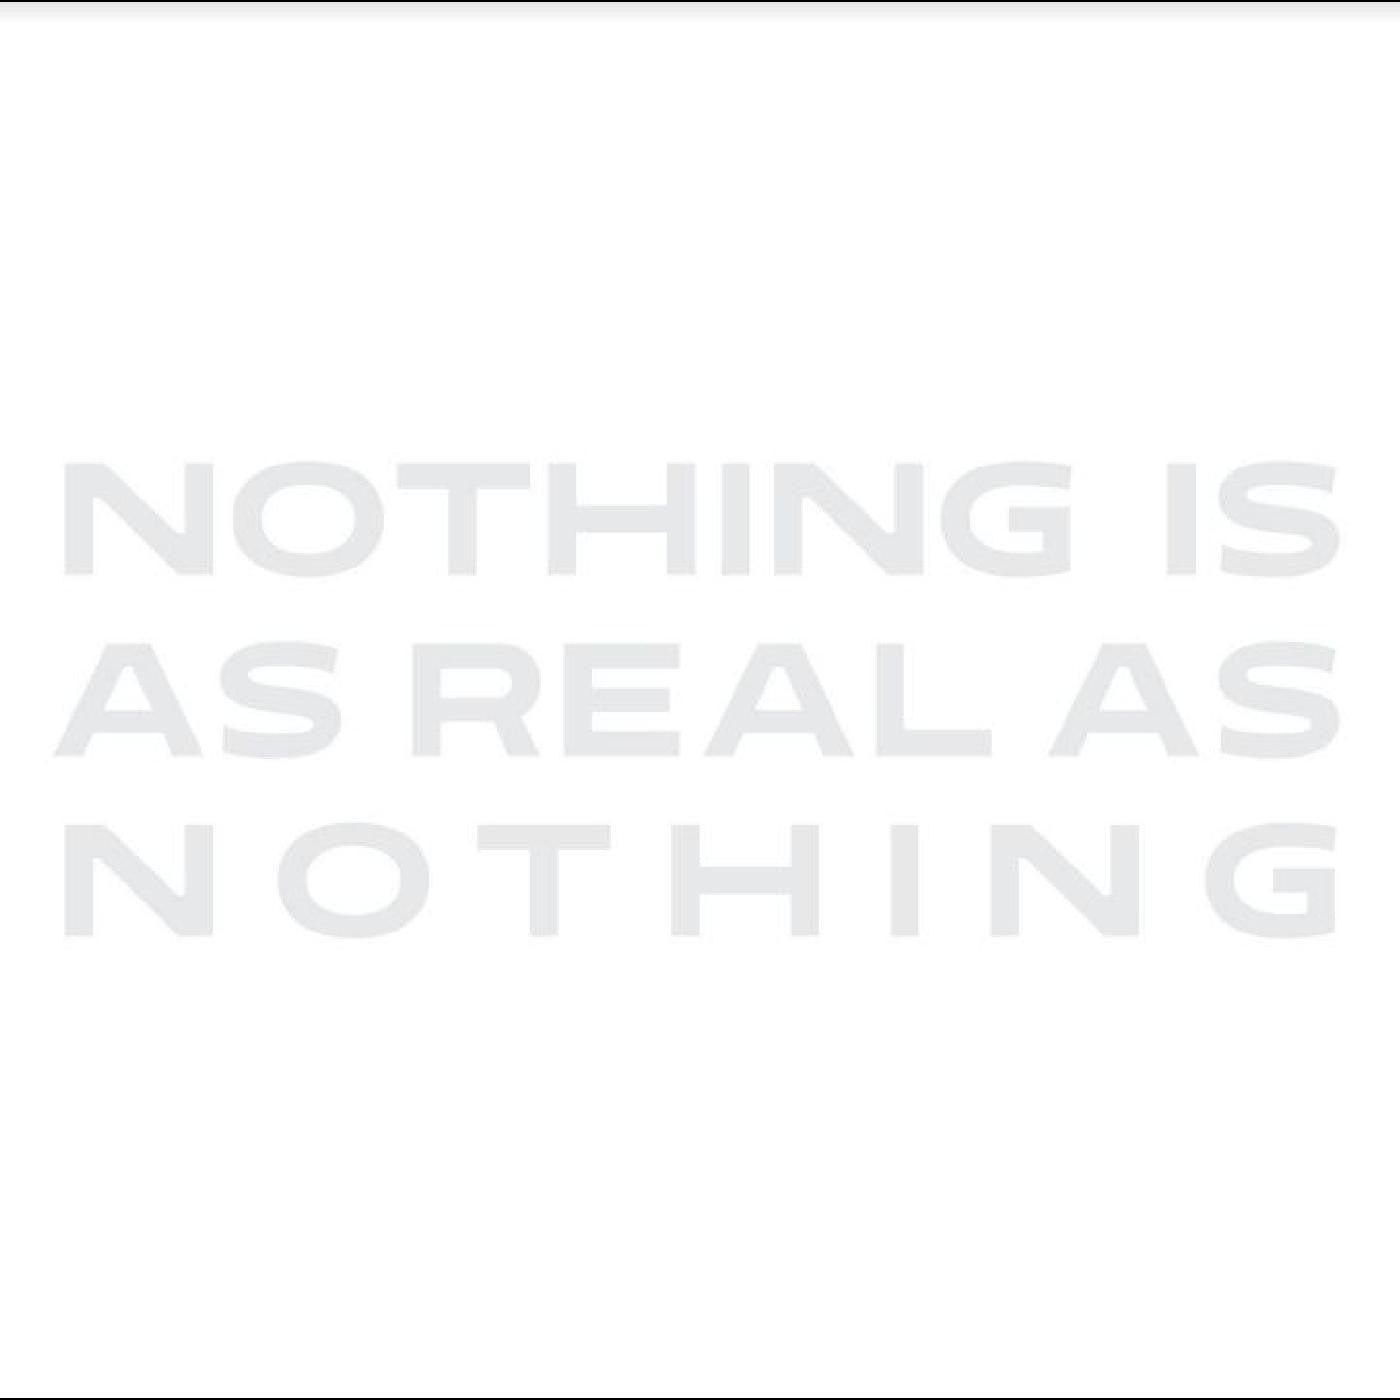 CD - John Zorn - Nothing Is As Real As Nothing